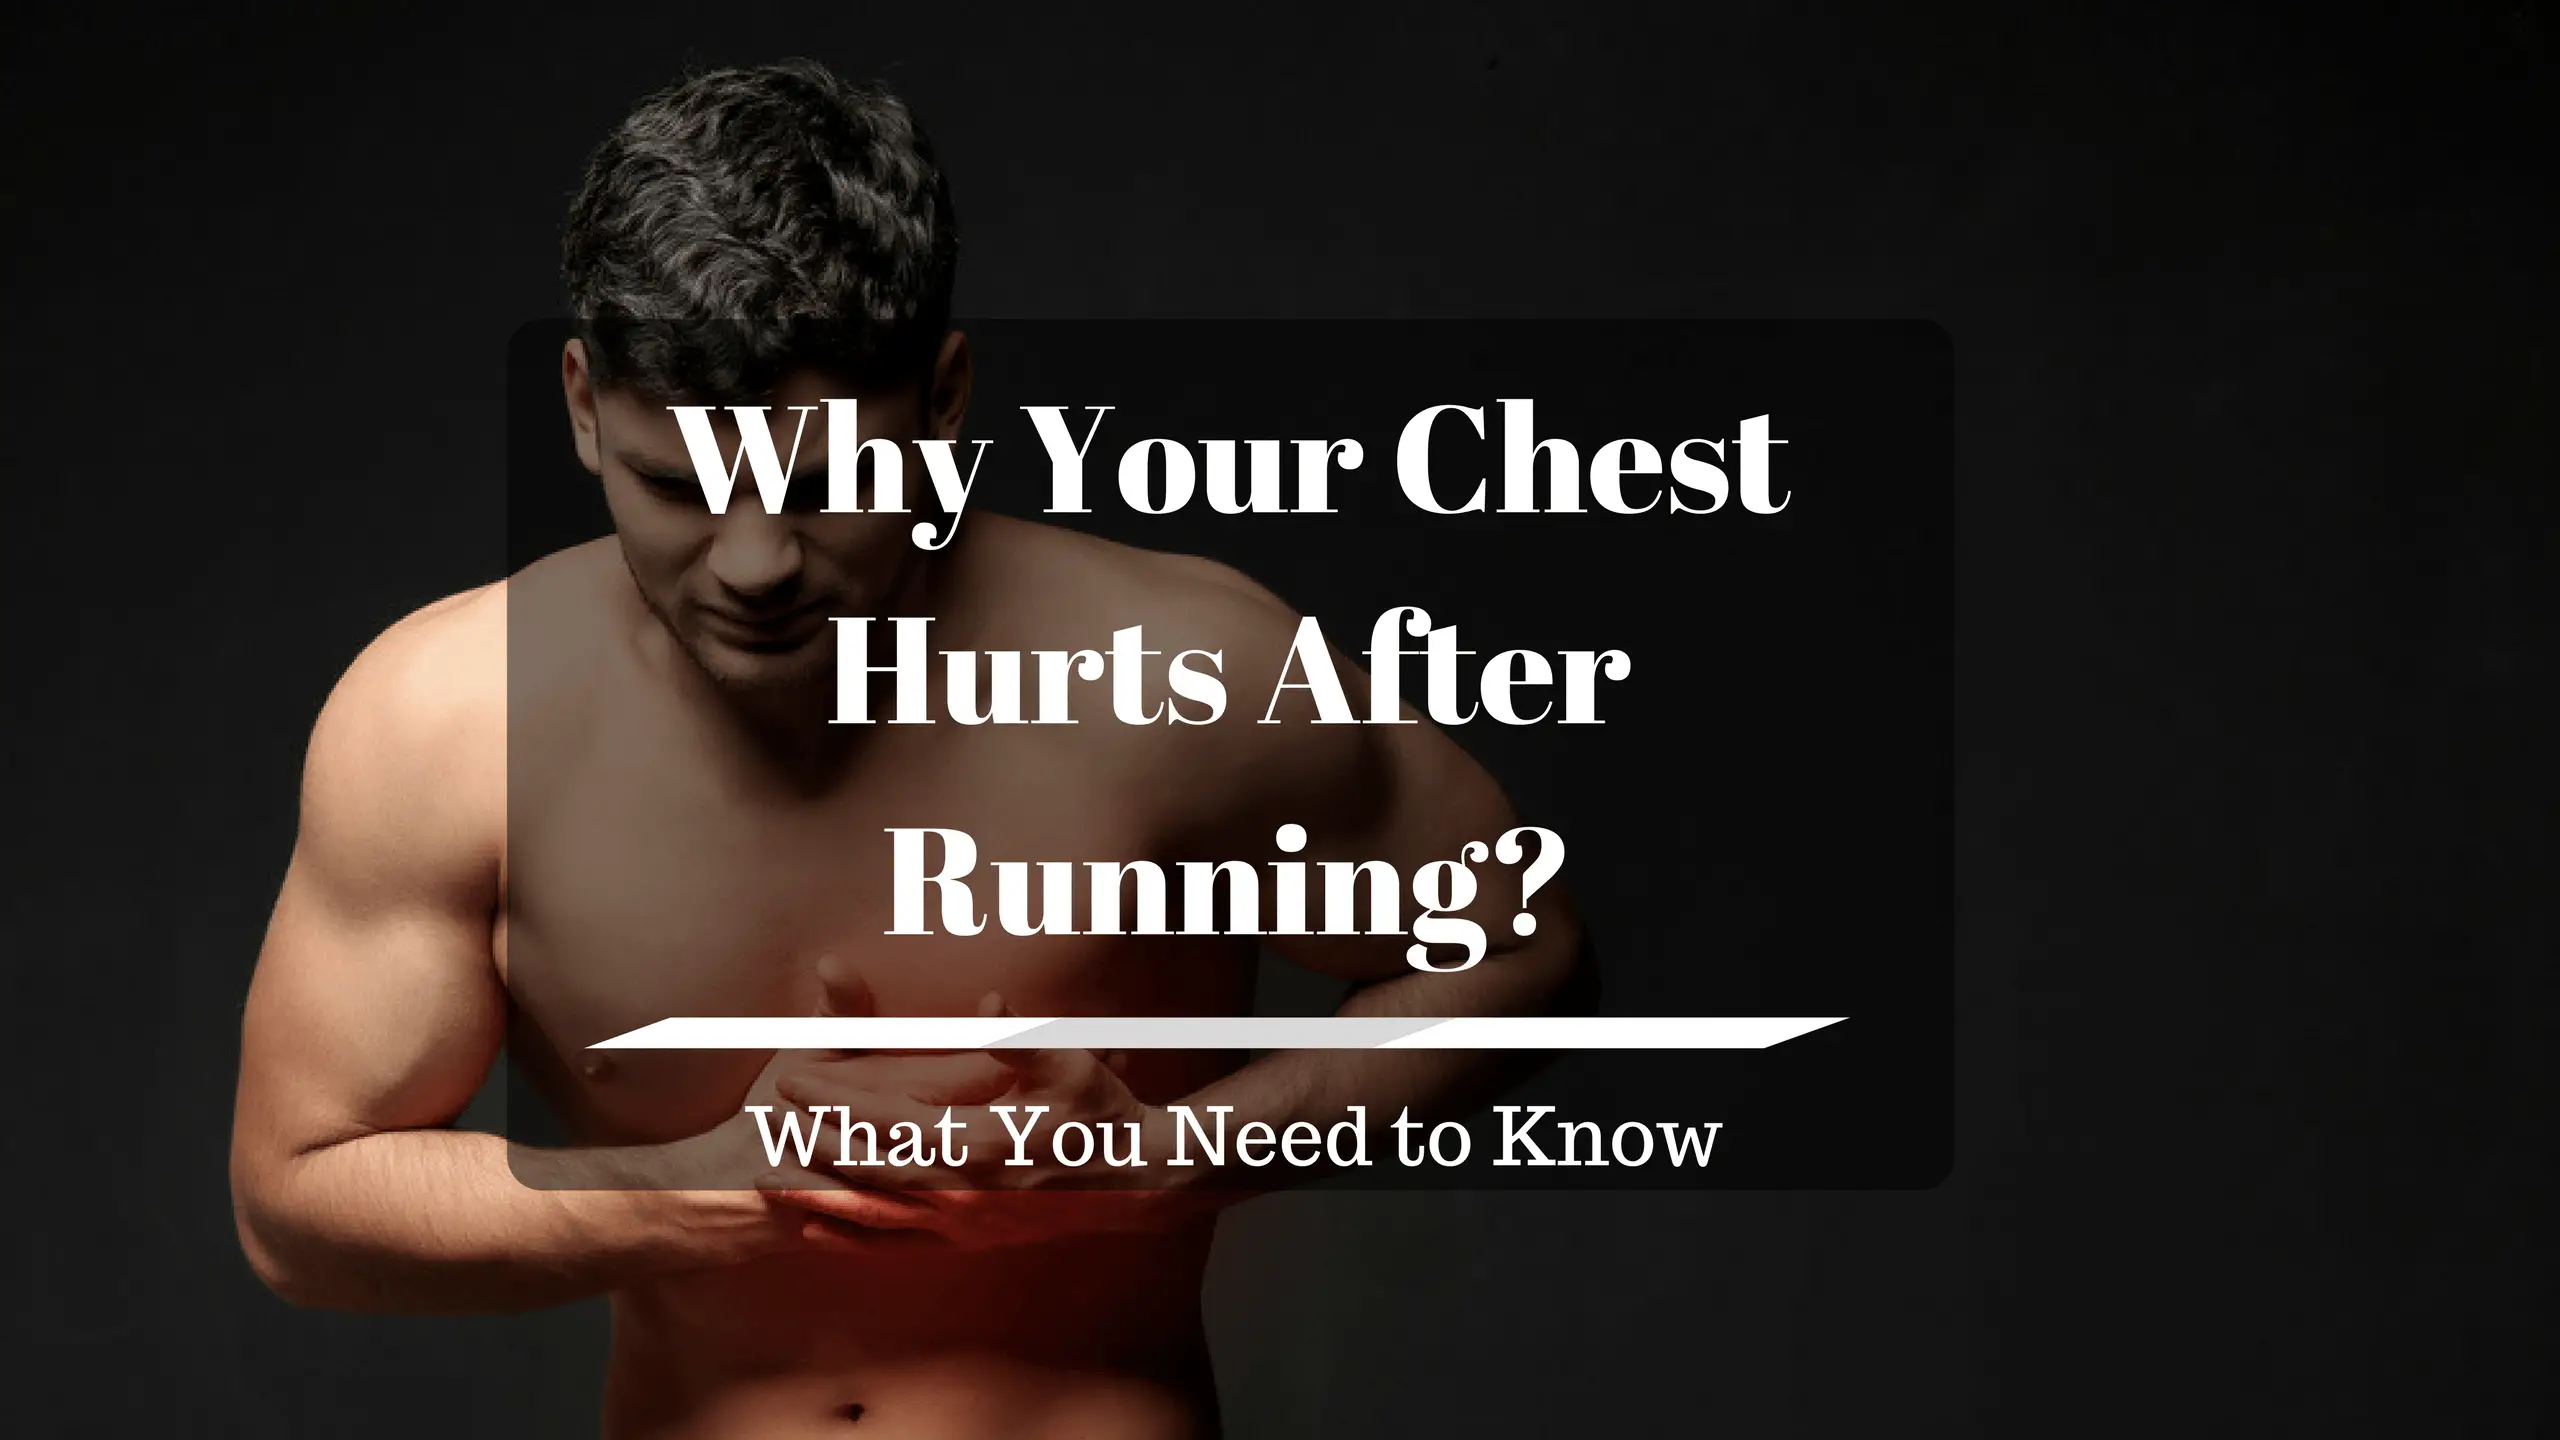 Why Your Chest Hurts After Running